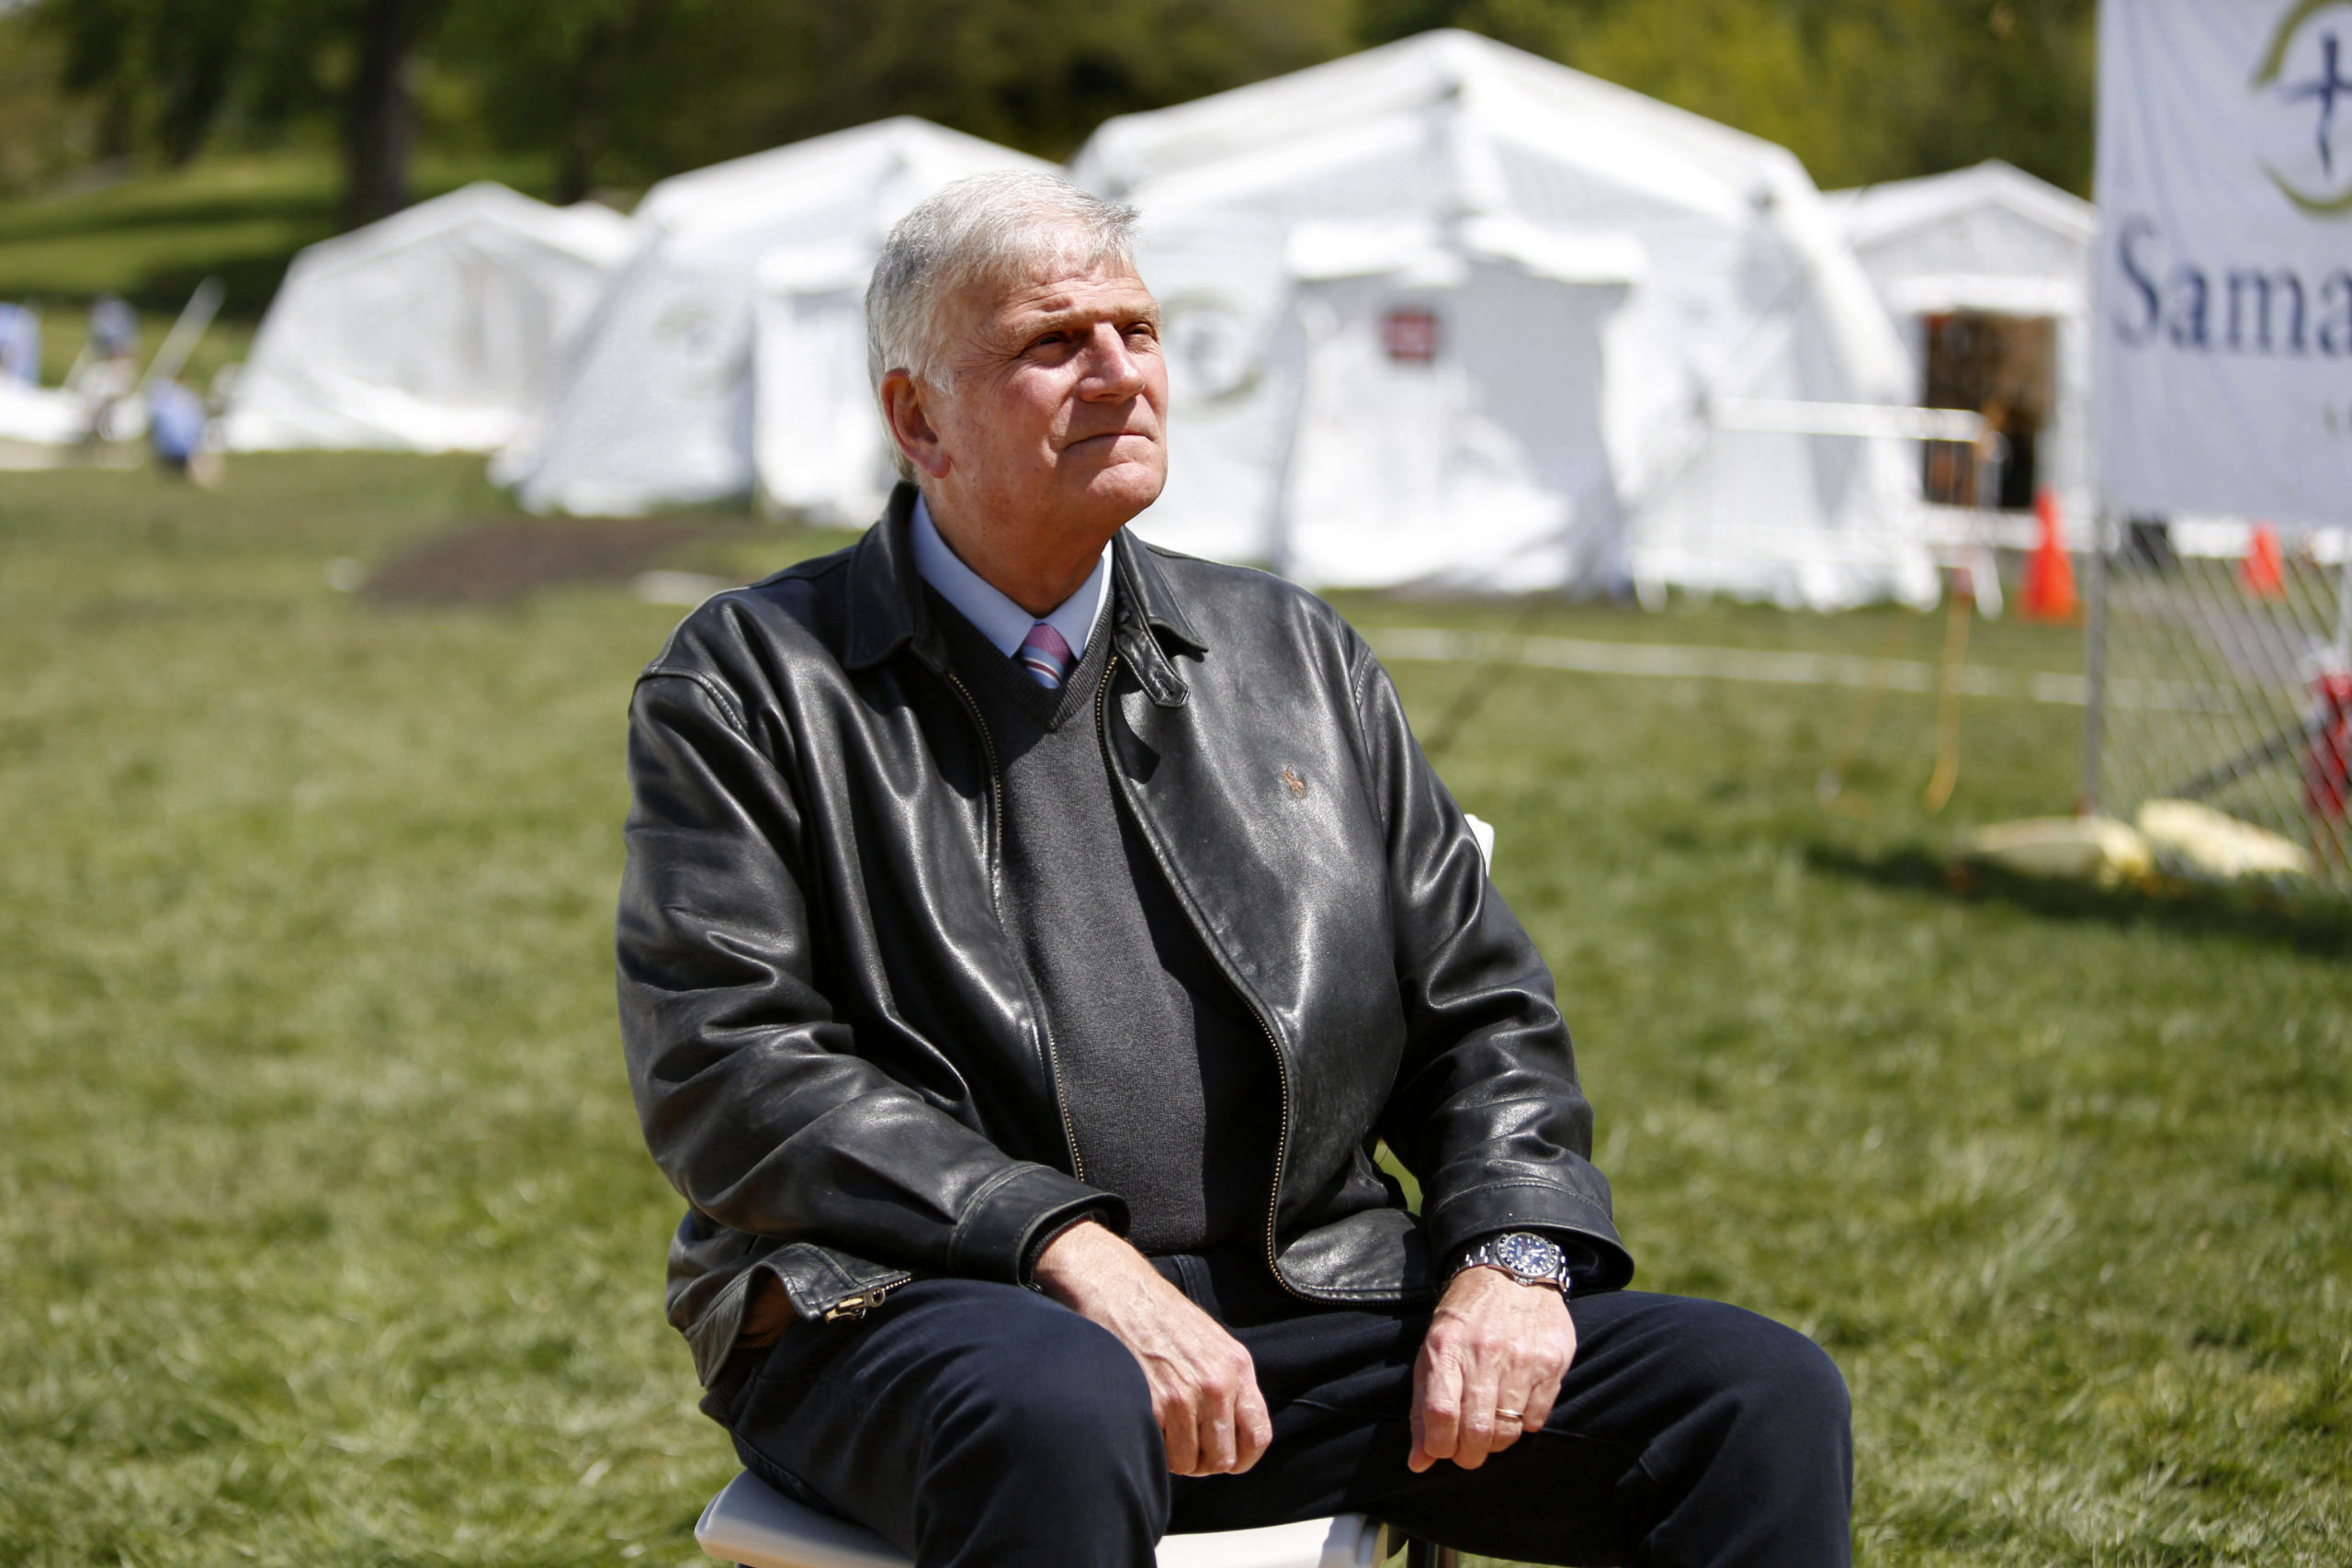 FILE - In this May 7, 2020, file photo, the Rev. Franklin Graham, president and CEO of Samaritan's Purse, sits for a portrait at his group's field hospital in New York's Central Park. The Associated Press sat down to talk with Graham during his recent visit to New York, where his Christian relief charity Samaritan’s Purse had operated the Central Park field hospital to treat coronavirus patients. (AP Photo/Jessie Wardarski, File)